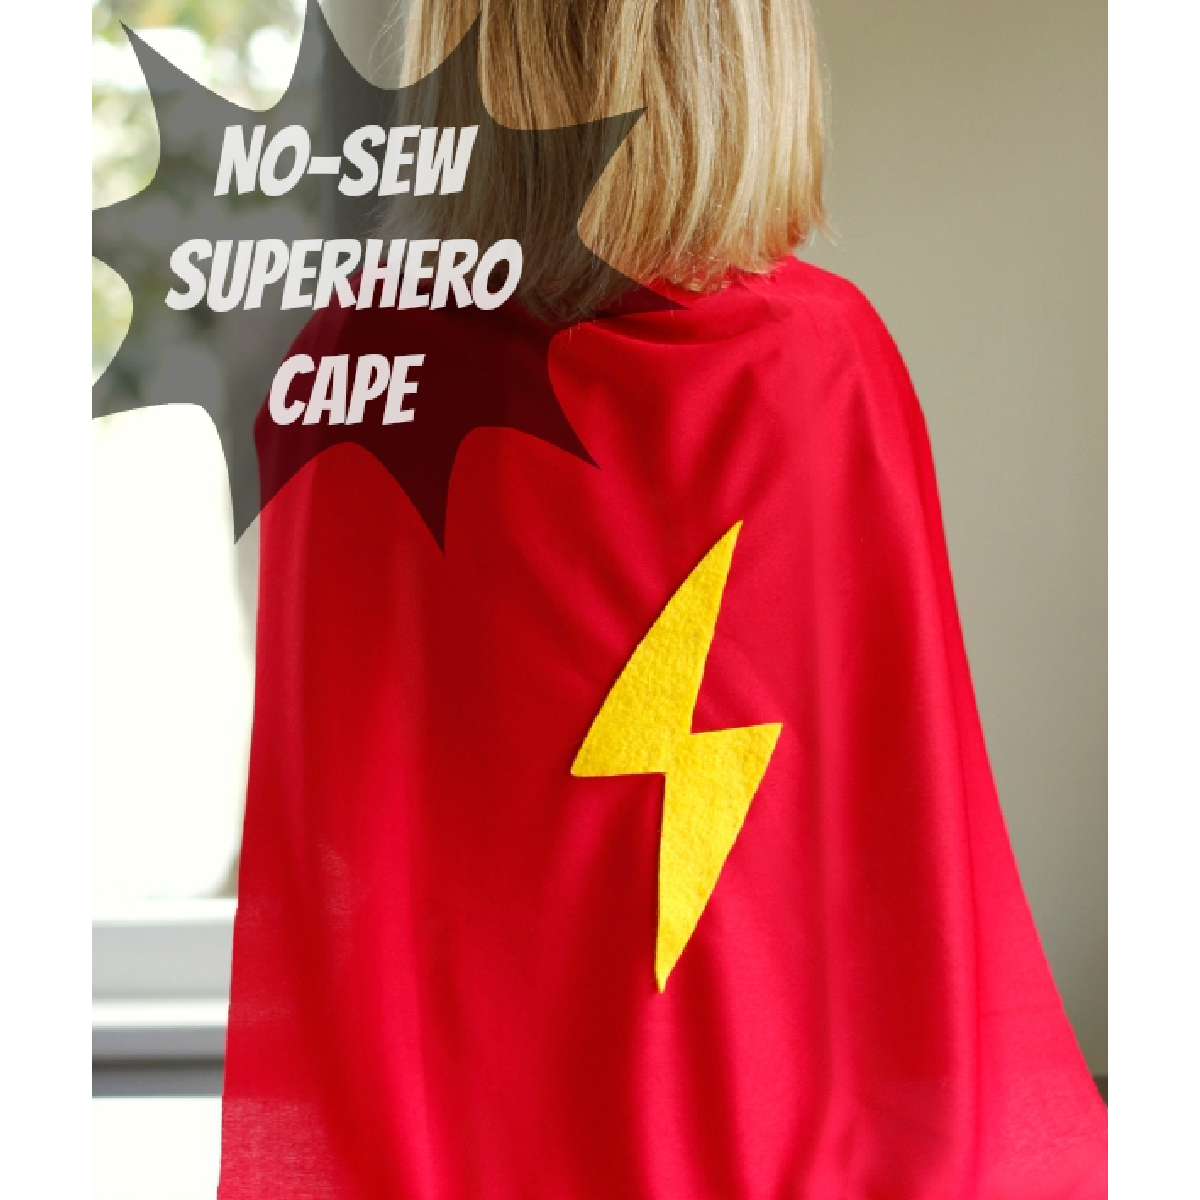 Dress up ideas- no sew red and yellow superhero cape craft on little girl- kids activities blog